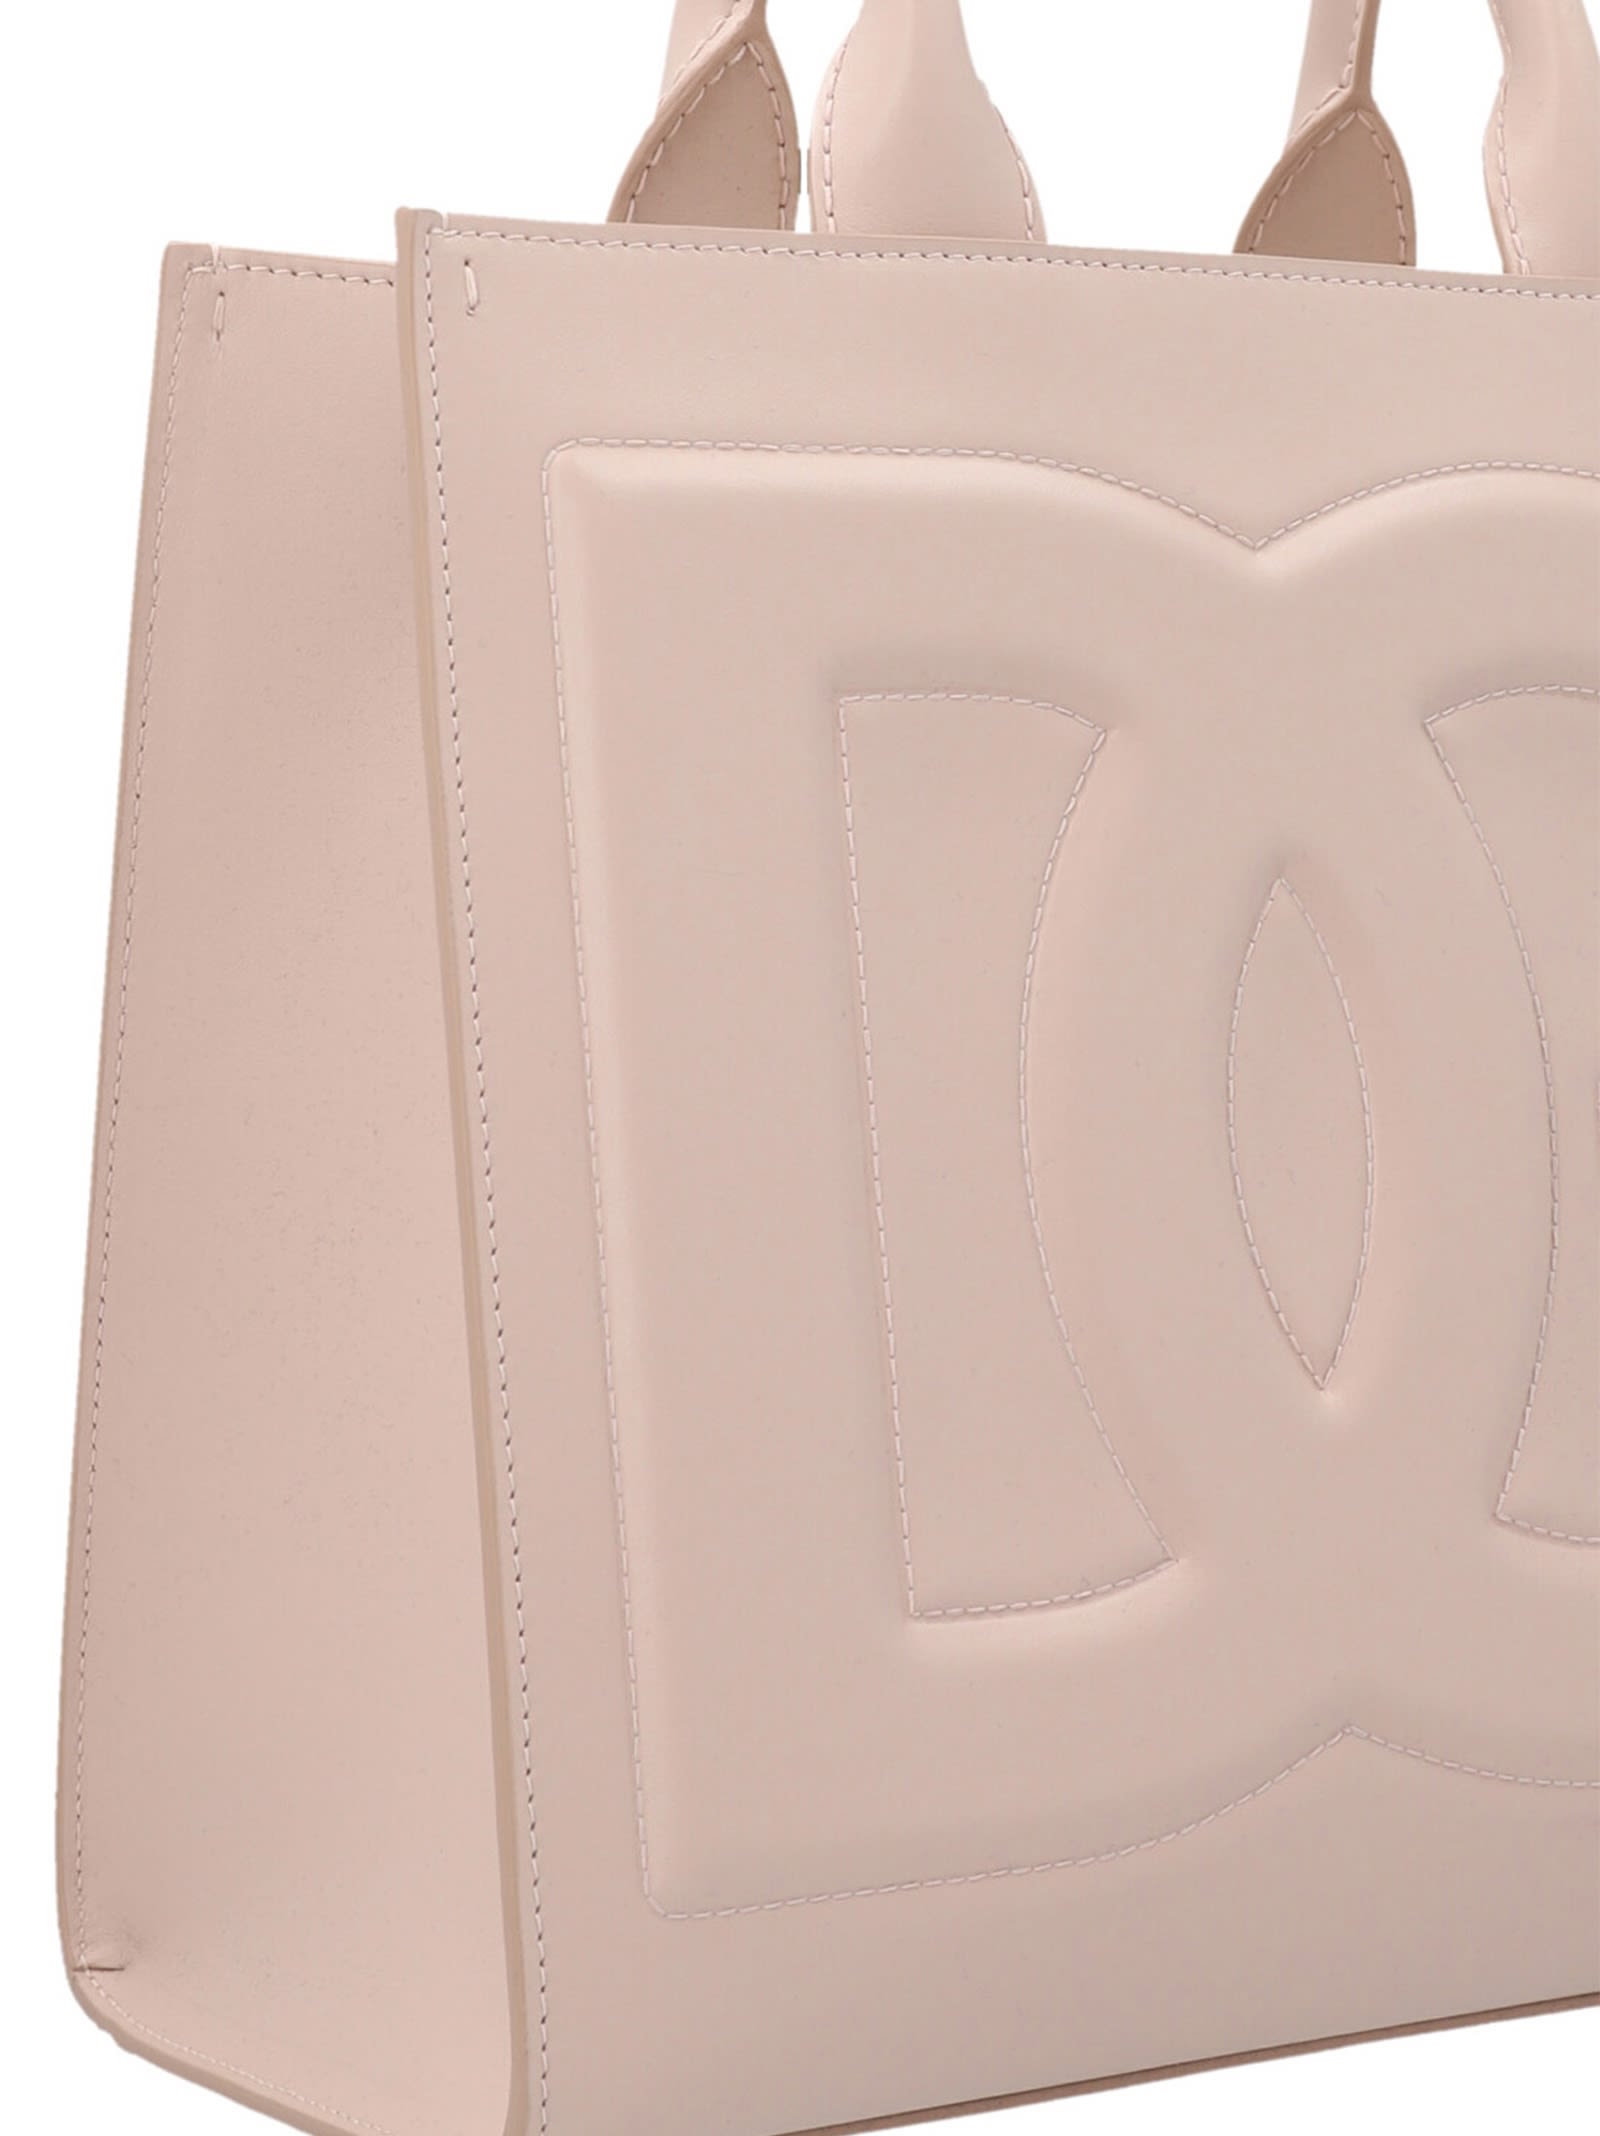 DG Daily Mini Leather Tote Bag in Pink - Dolce Gabbana